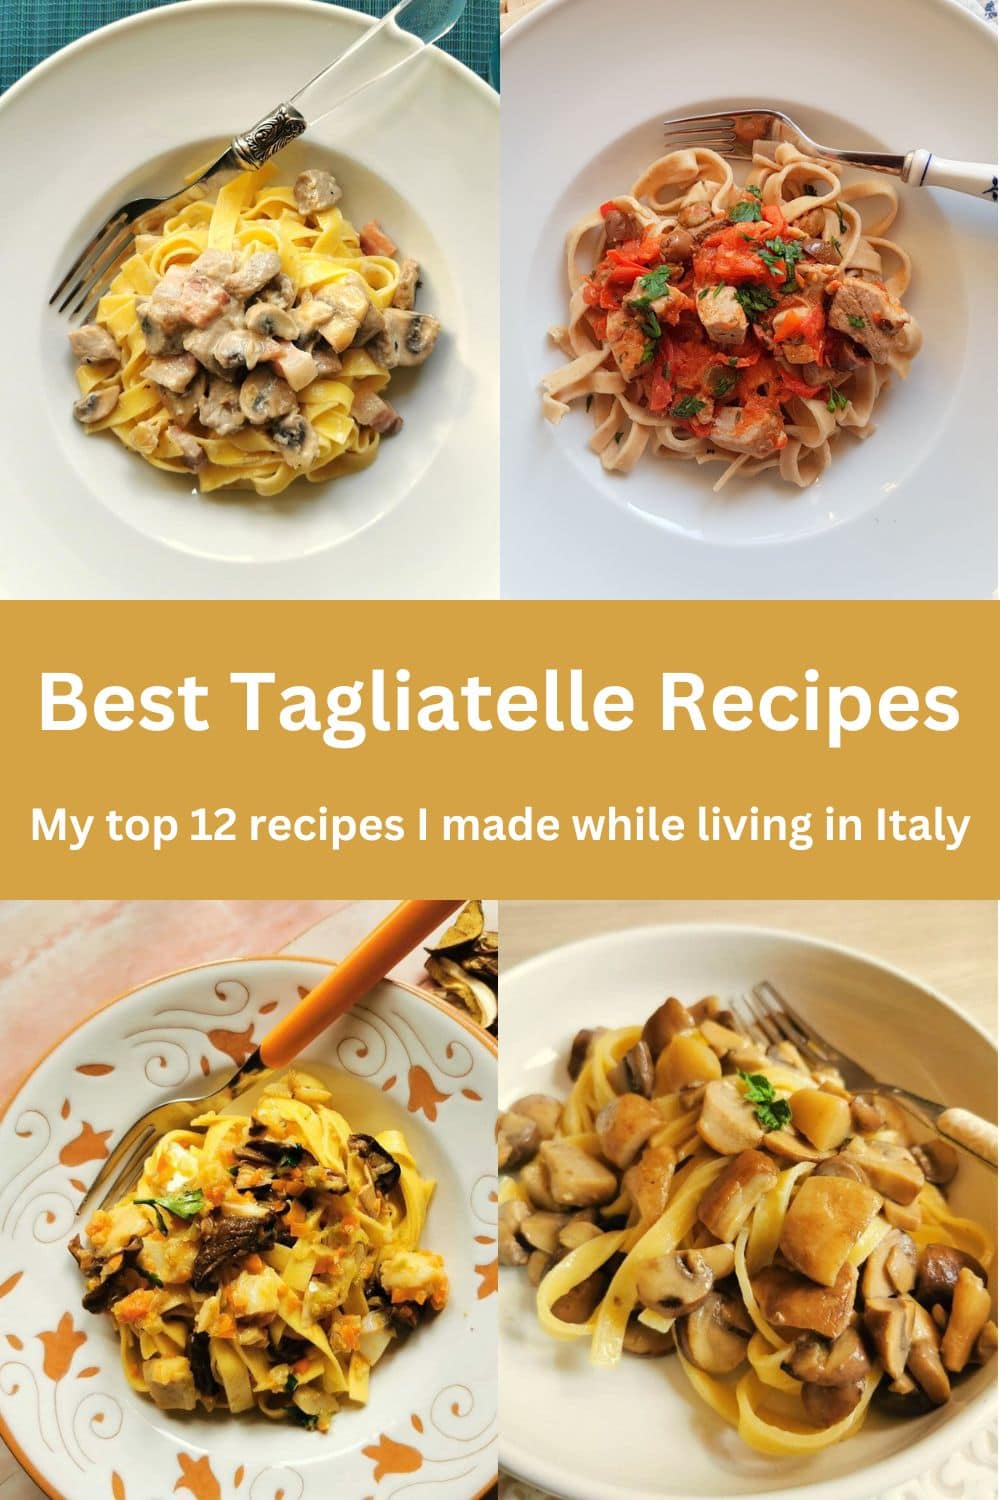 Best tagliatelle recipes. My top 12 recipes I made while living in Italy.